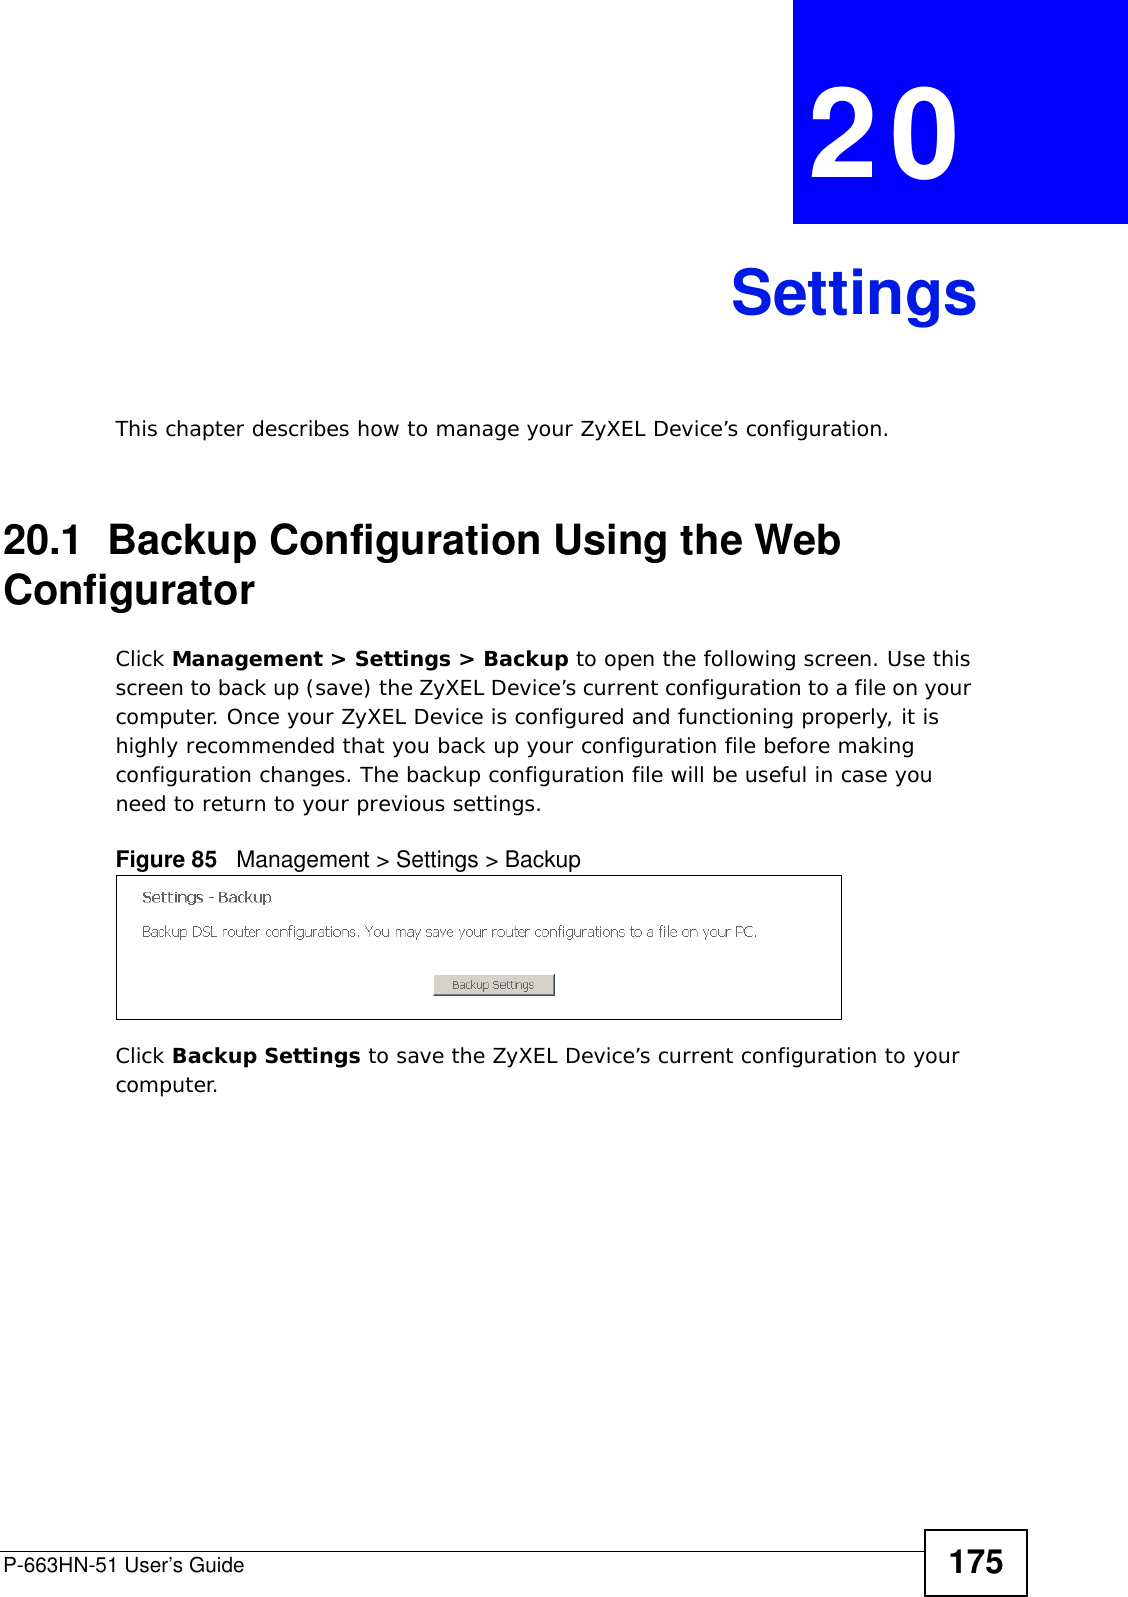 P-663HN-51 User’s Guide 175CHAPTER  20 SettingsThis chapter describes how to manage your ZyXEL Device’s configuration.20.1  Backup Configuration Using the Web ConfiguratorClick Management &gt; Settings &gt; Backup to open the following screen. Use this screen to back up (save) the ZyXEL Device’s current configuration to a file on your computer. Once your ZyXEL Device is configured and functioning properly, it is highly recommended that you back up your configuration file before making configuration changes. The backup configuration file will be useful in case you need to return to your previous settings. Figure 85   Management &gt; Settings &gt; BackupClick Backup Settings to save the ZyXEL Device’s current configuration to your computer.